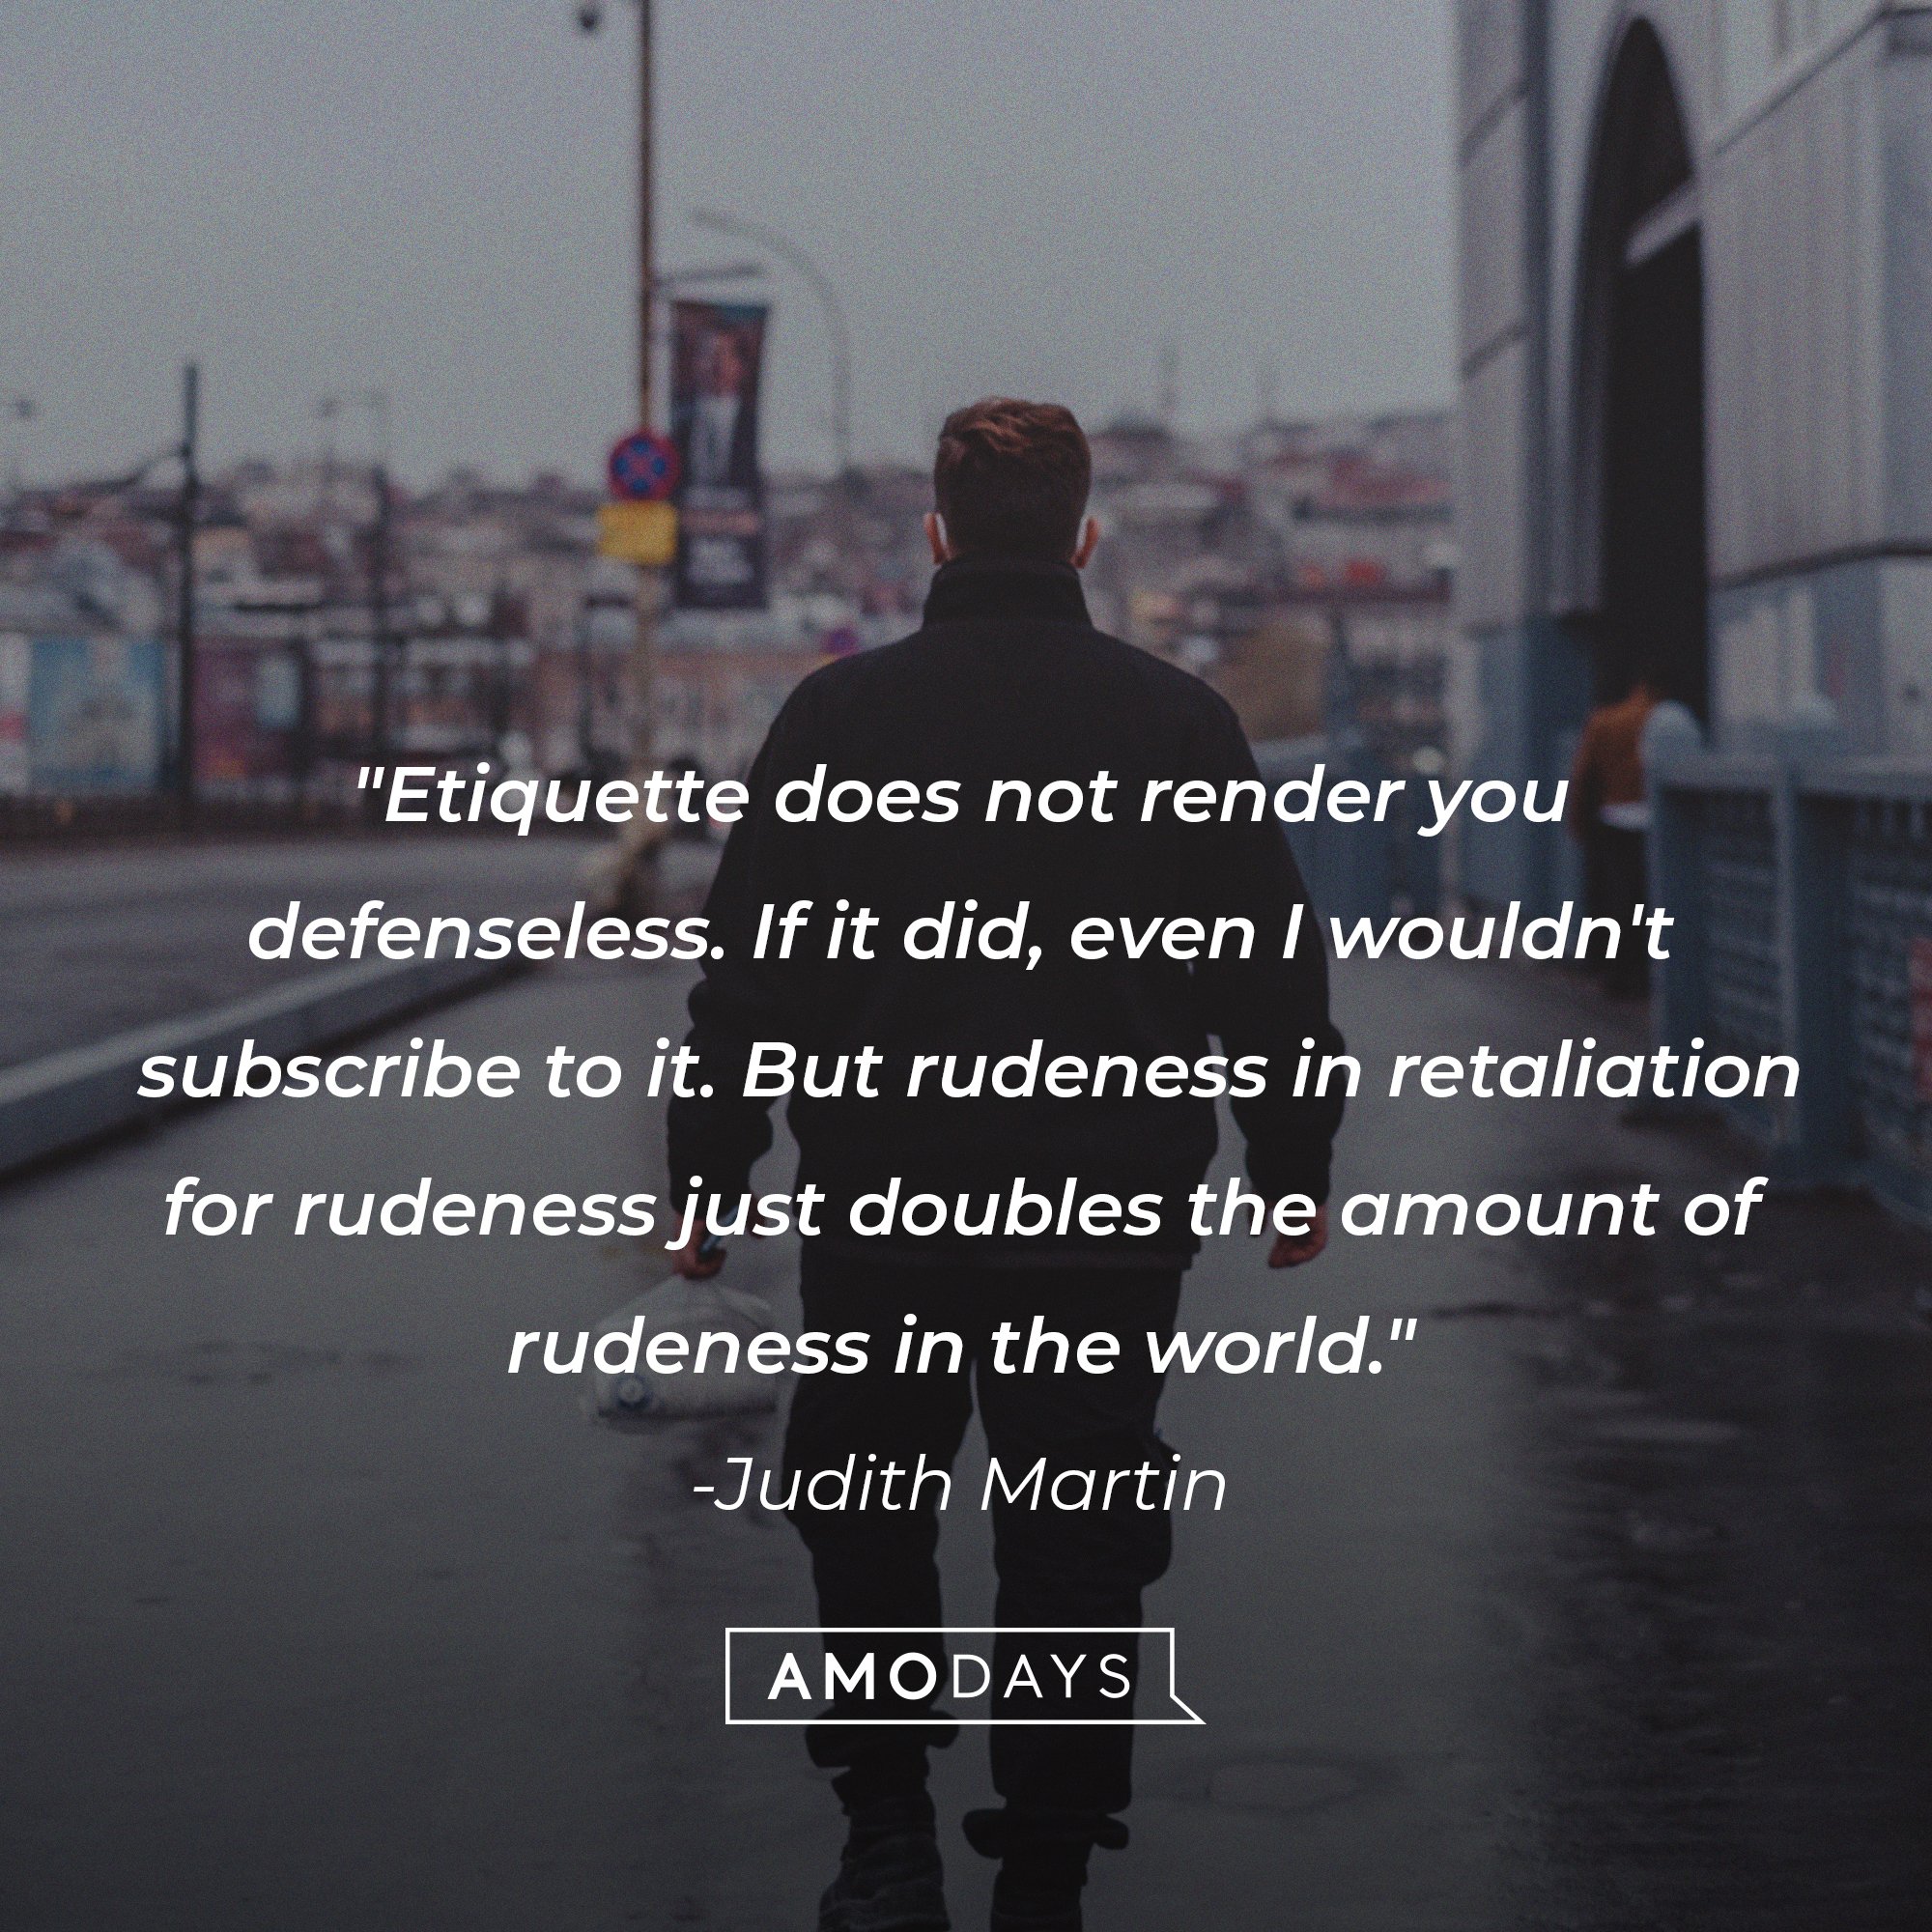 Judith Martin’s quote: "Etiquette does not render you defenseless. If it did, even I wouldn't subscribe to it. But rudeness in retaliation for rudeness just doubles the amount of rudeness in the world." | Image: AmoDays